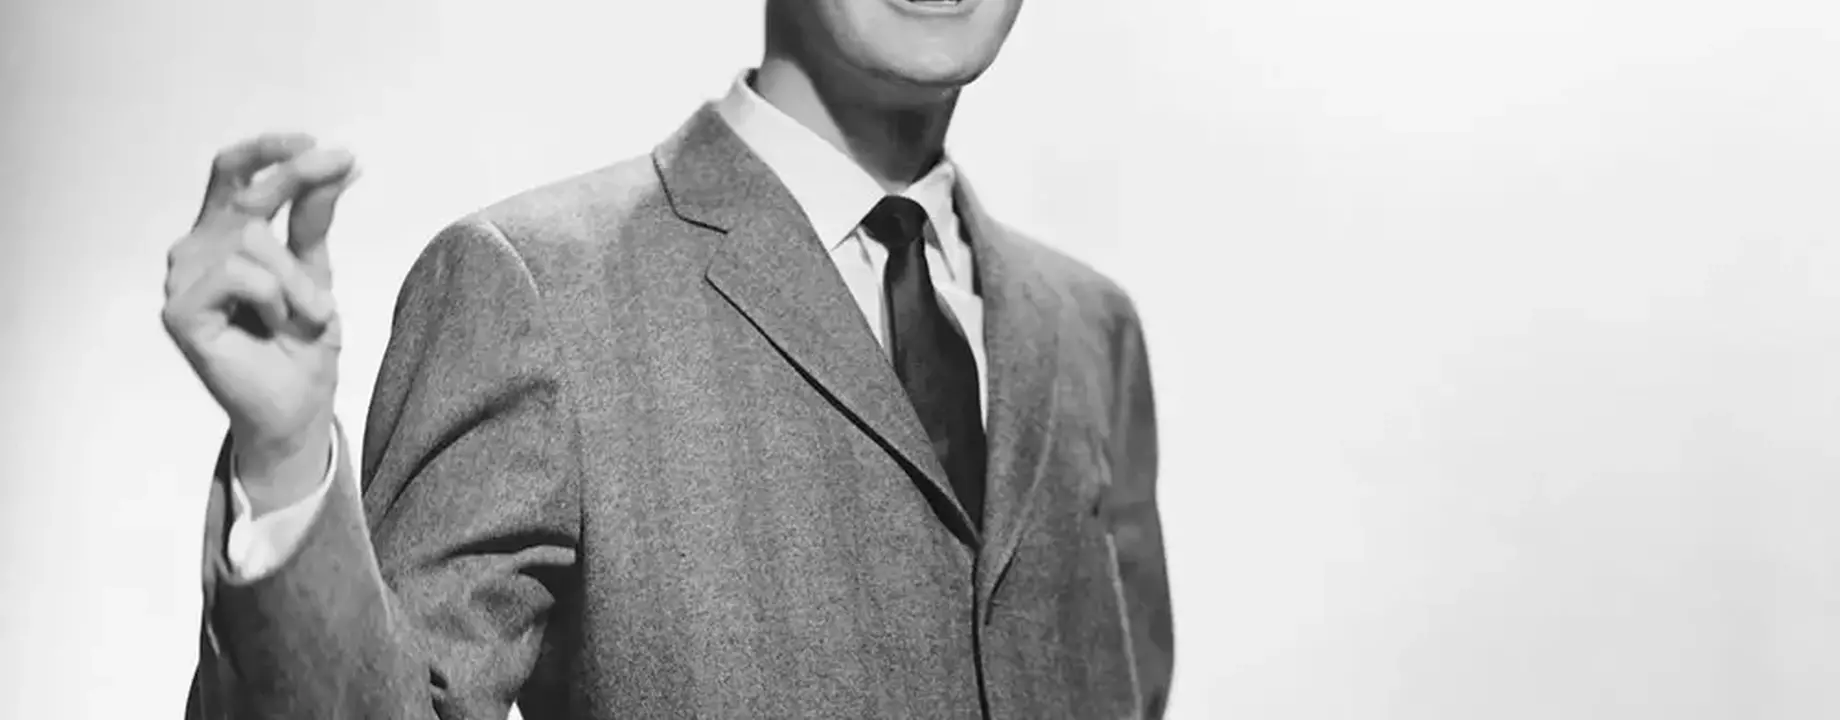 Buddy Holly Getty Images 73907812